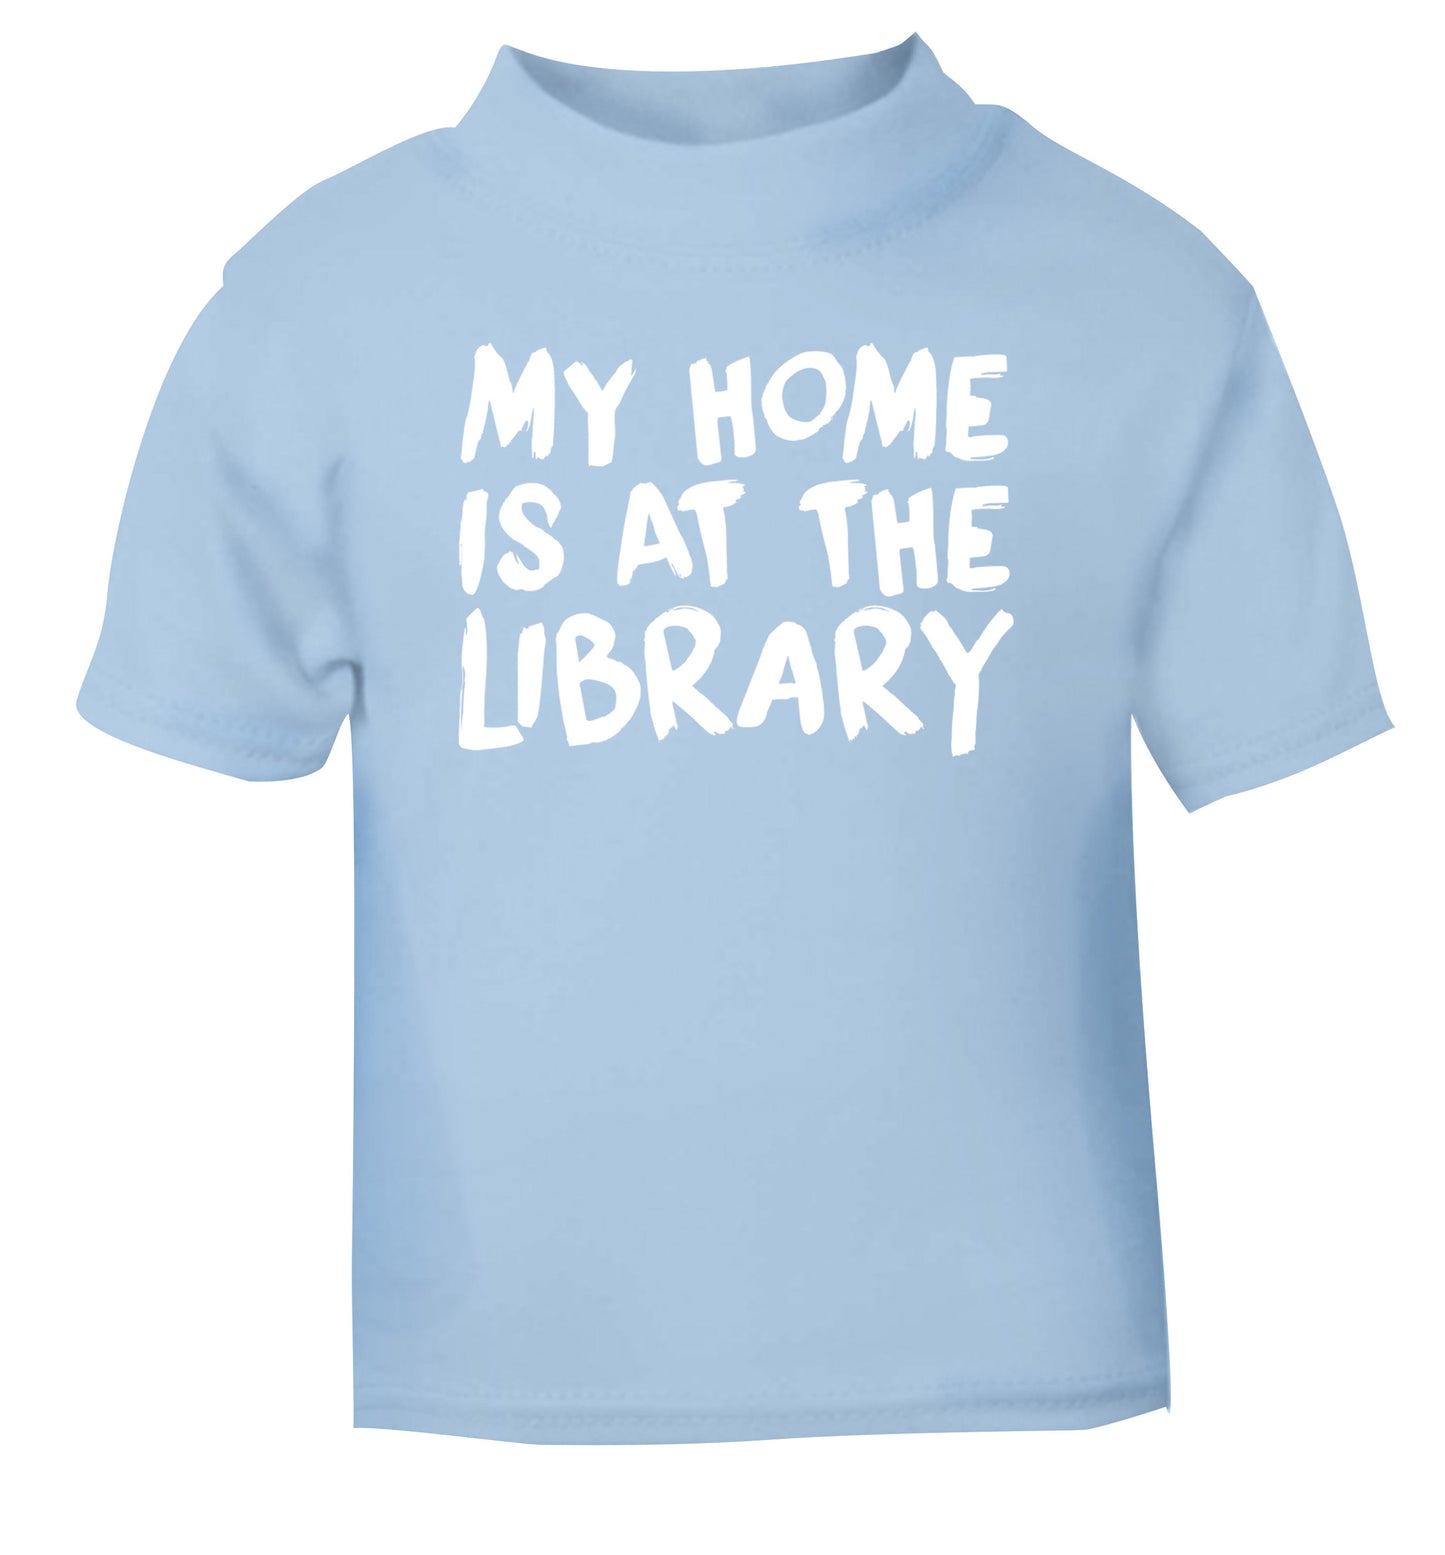 My home is at the library light blue Baby Toddler Tshirt 2 Years